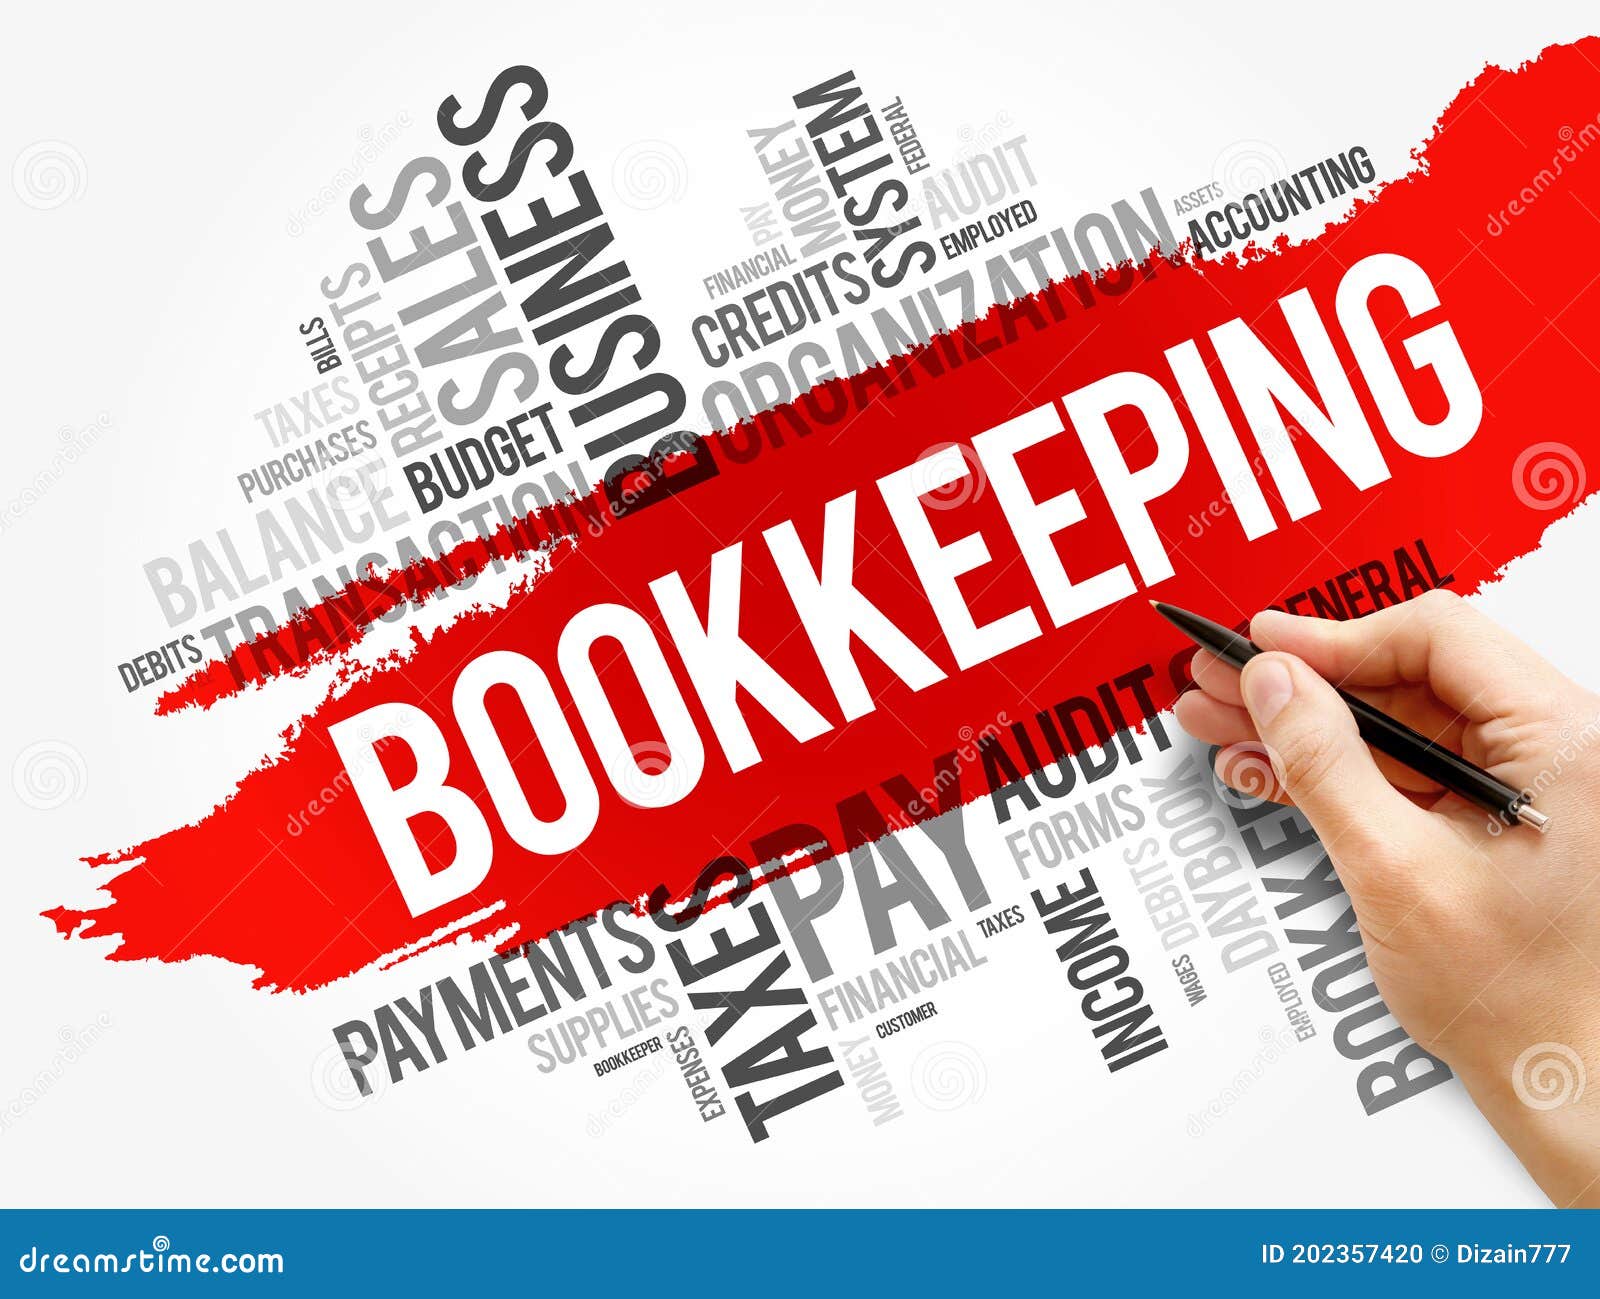 bookkeeping word cloud collage, business concept